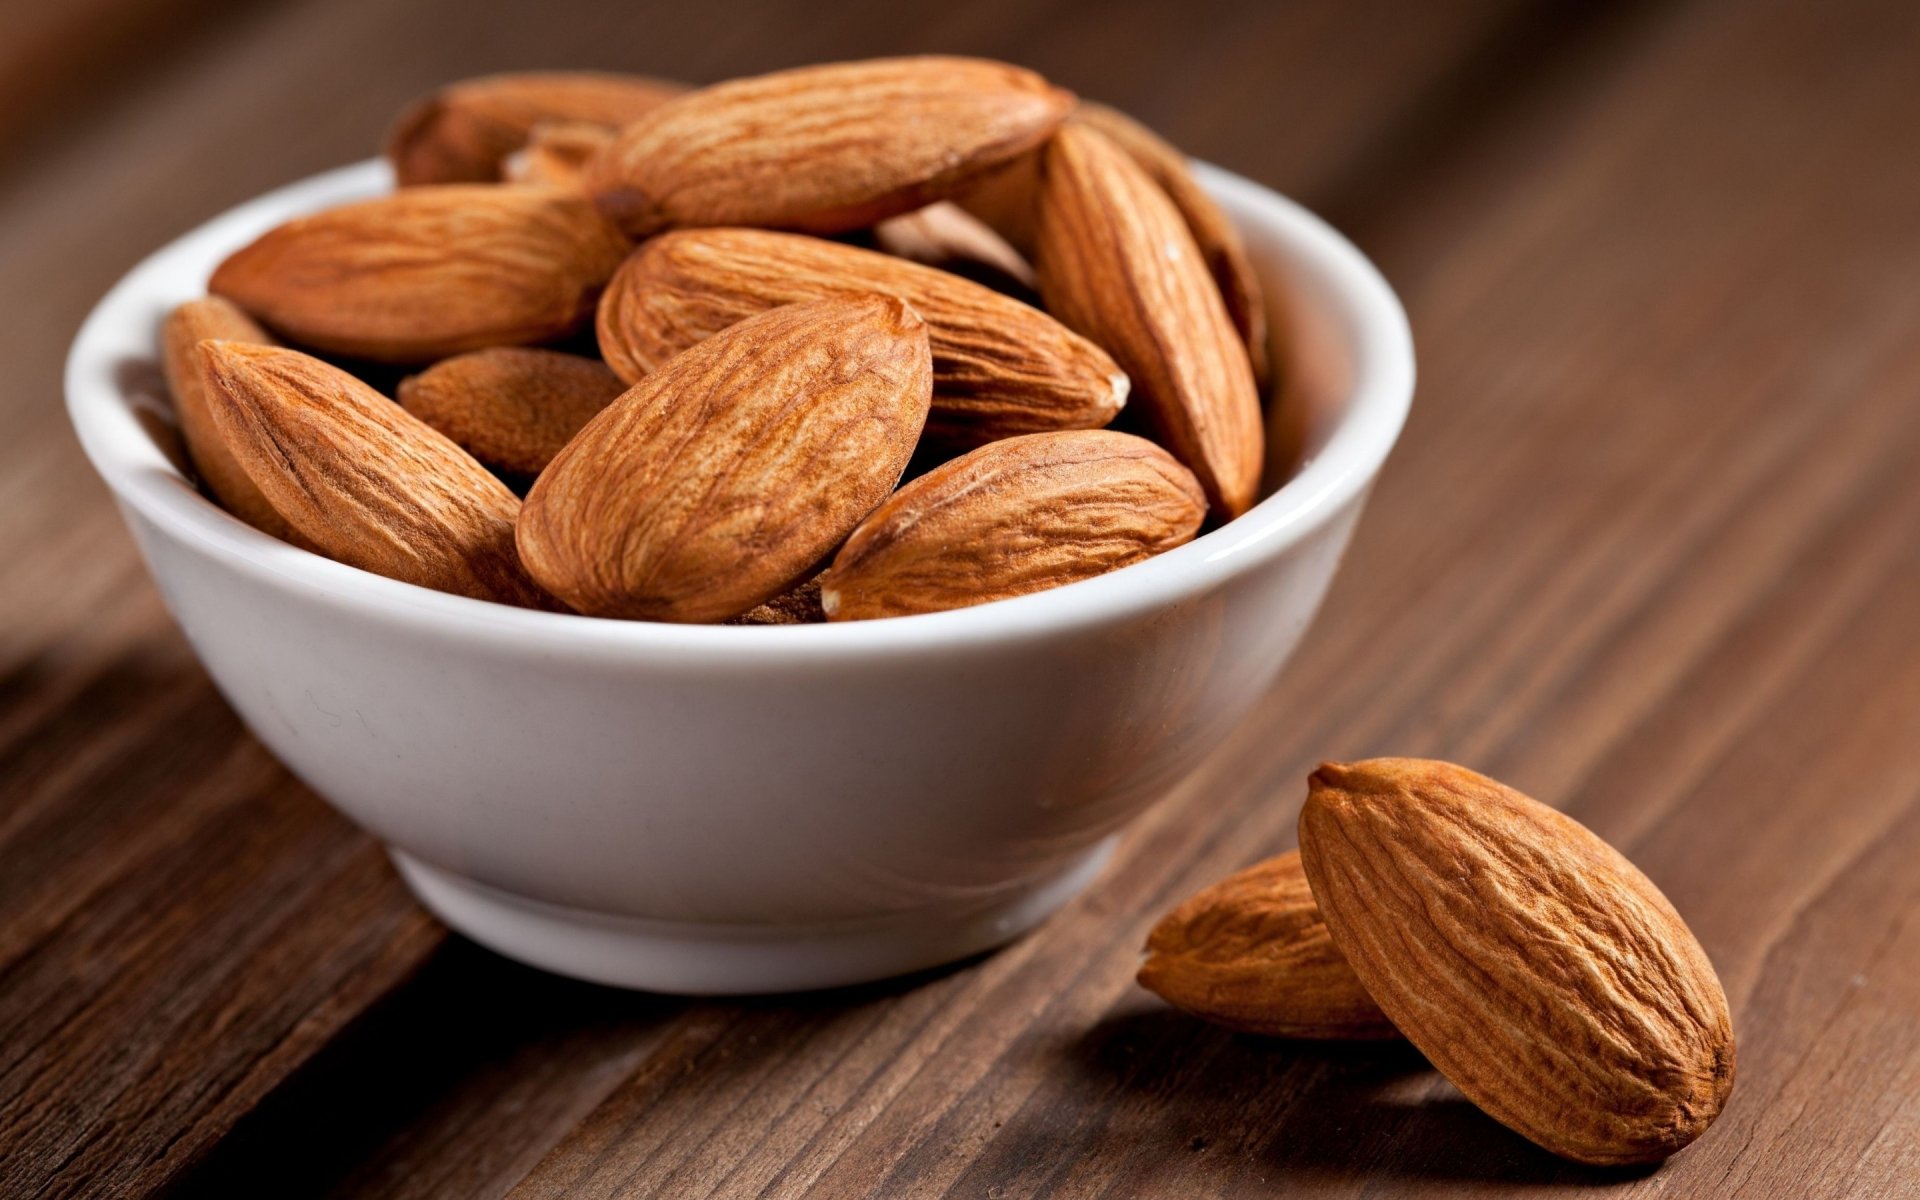 Soaked almonds vs. raw almonds: What is better?